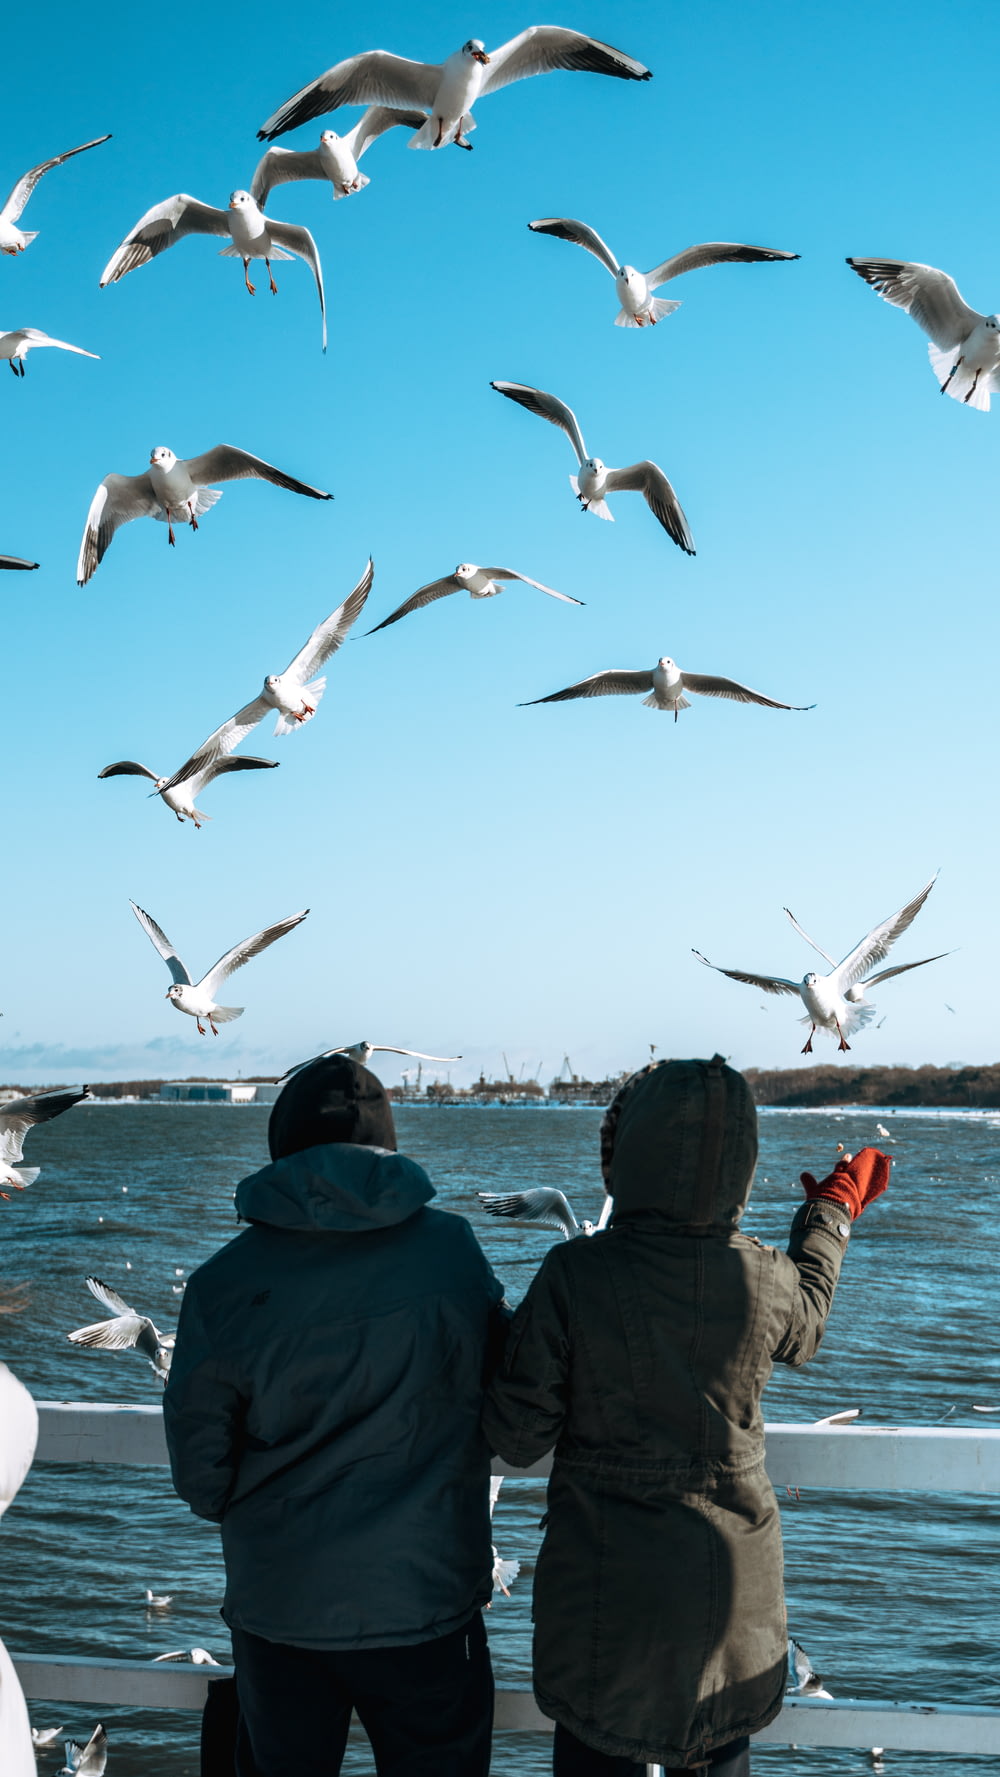 man in green jacket and black cap looking at birds flying over the sea during daytime